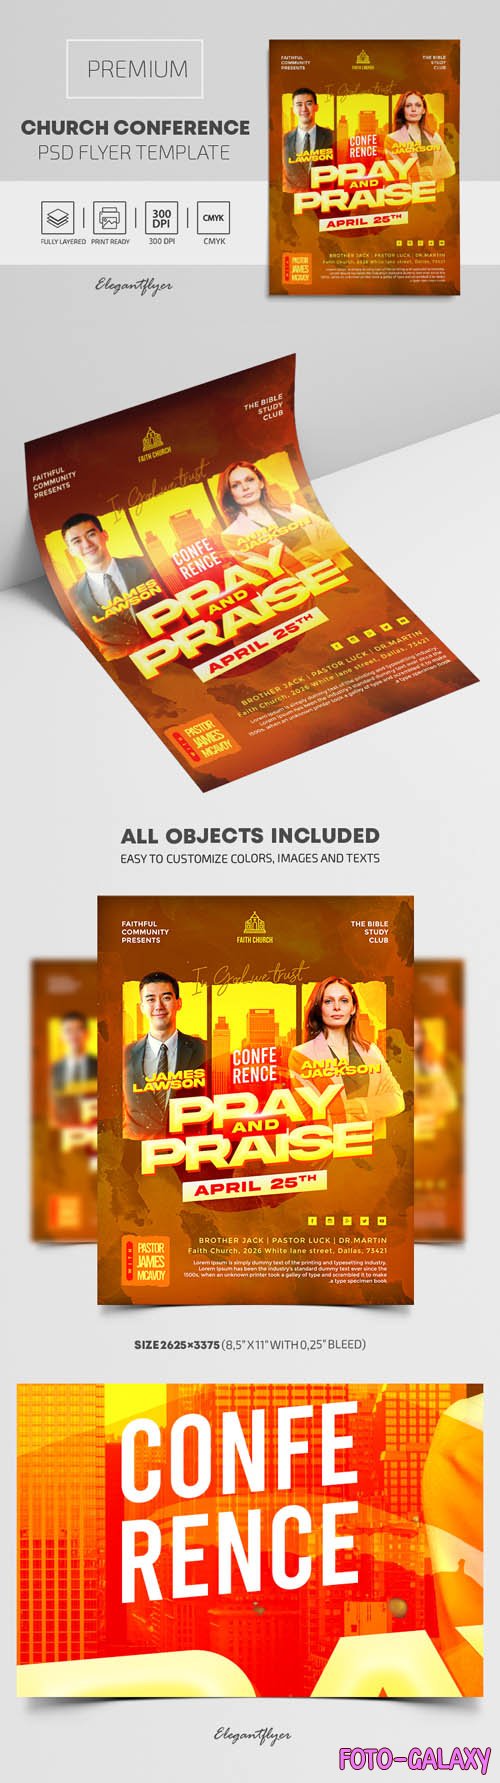 Church Conference Premium PSD Flyer Template